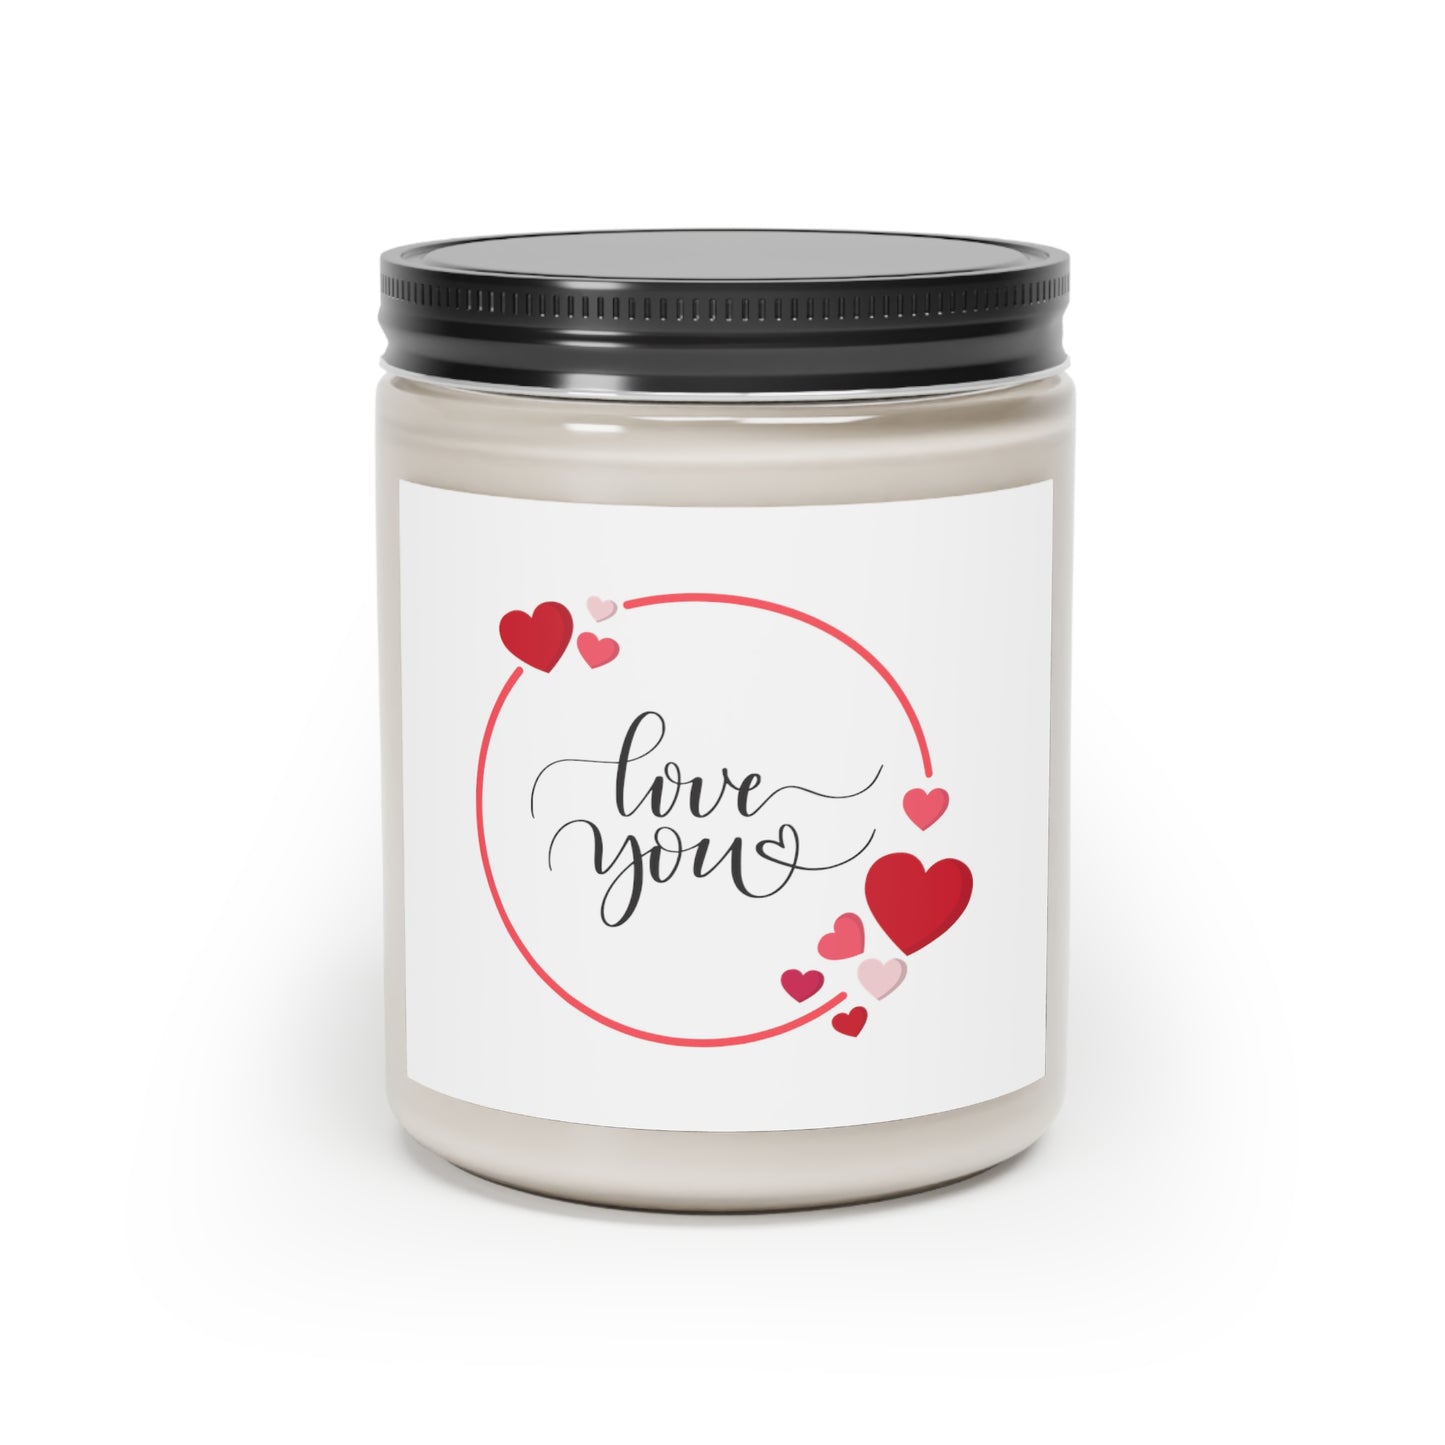 Gift for Her, Valentine's Scented Candle, Love You Printed Scanted Candles